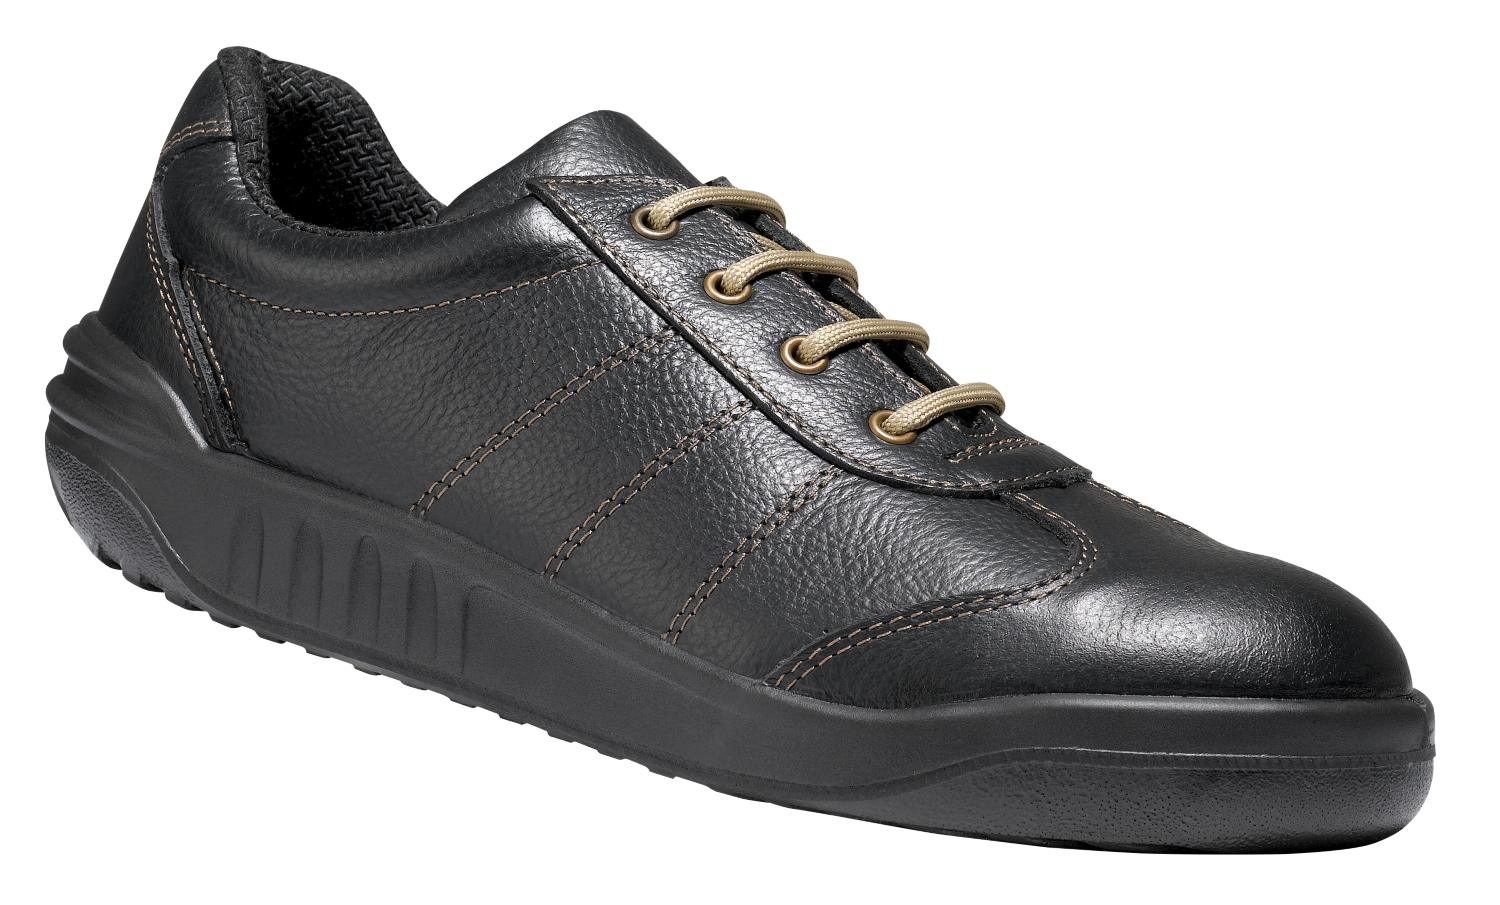  Chaussures basses Josia - S3 